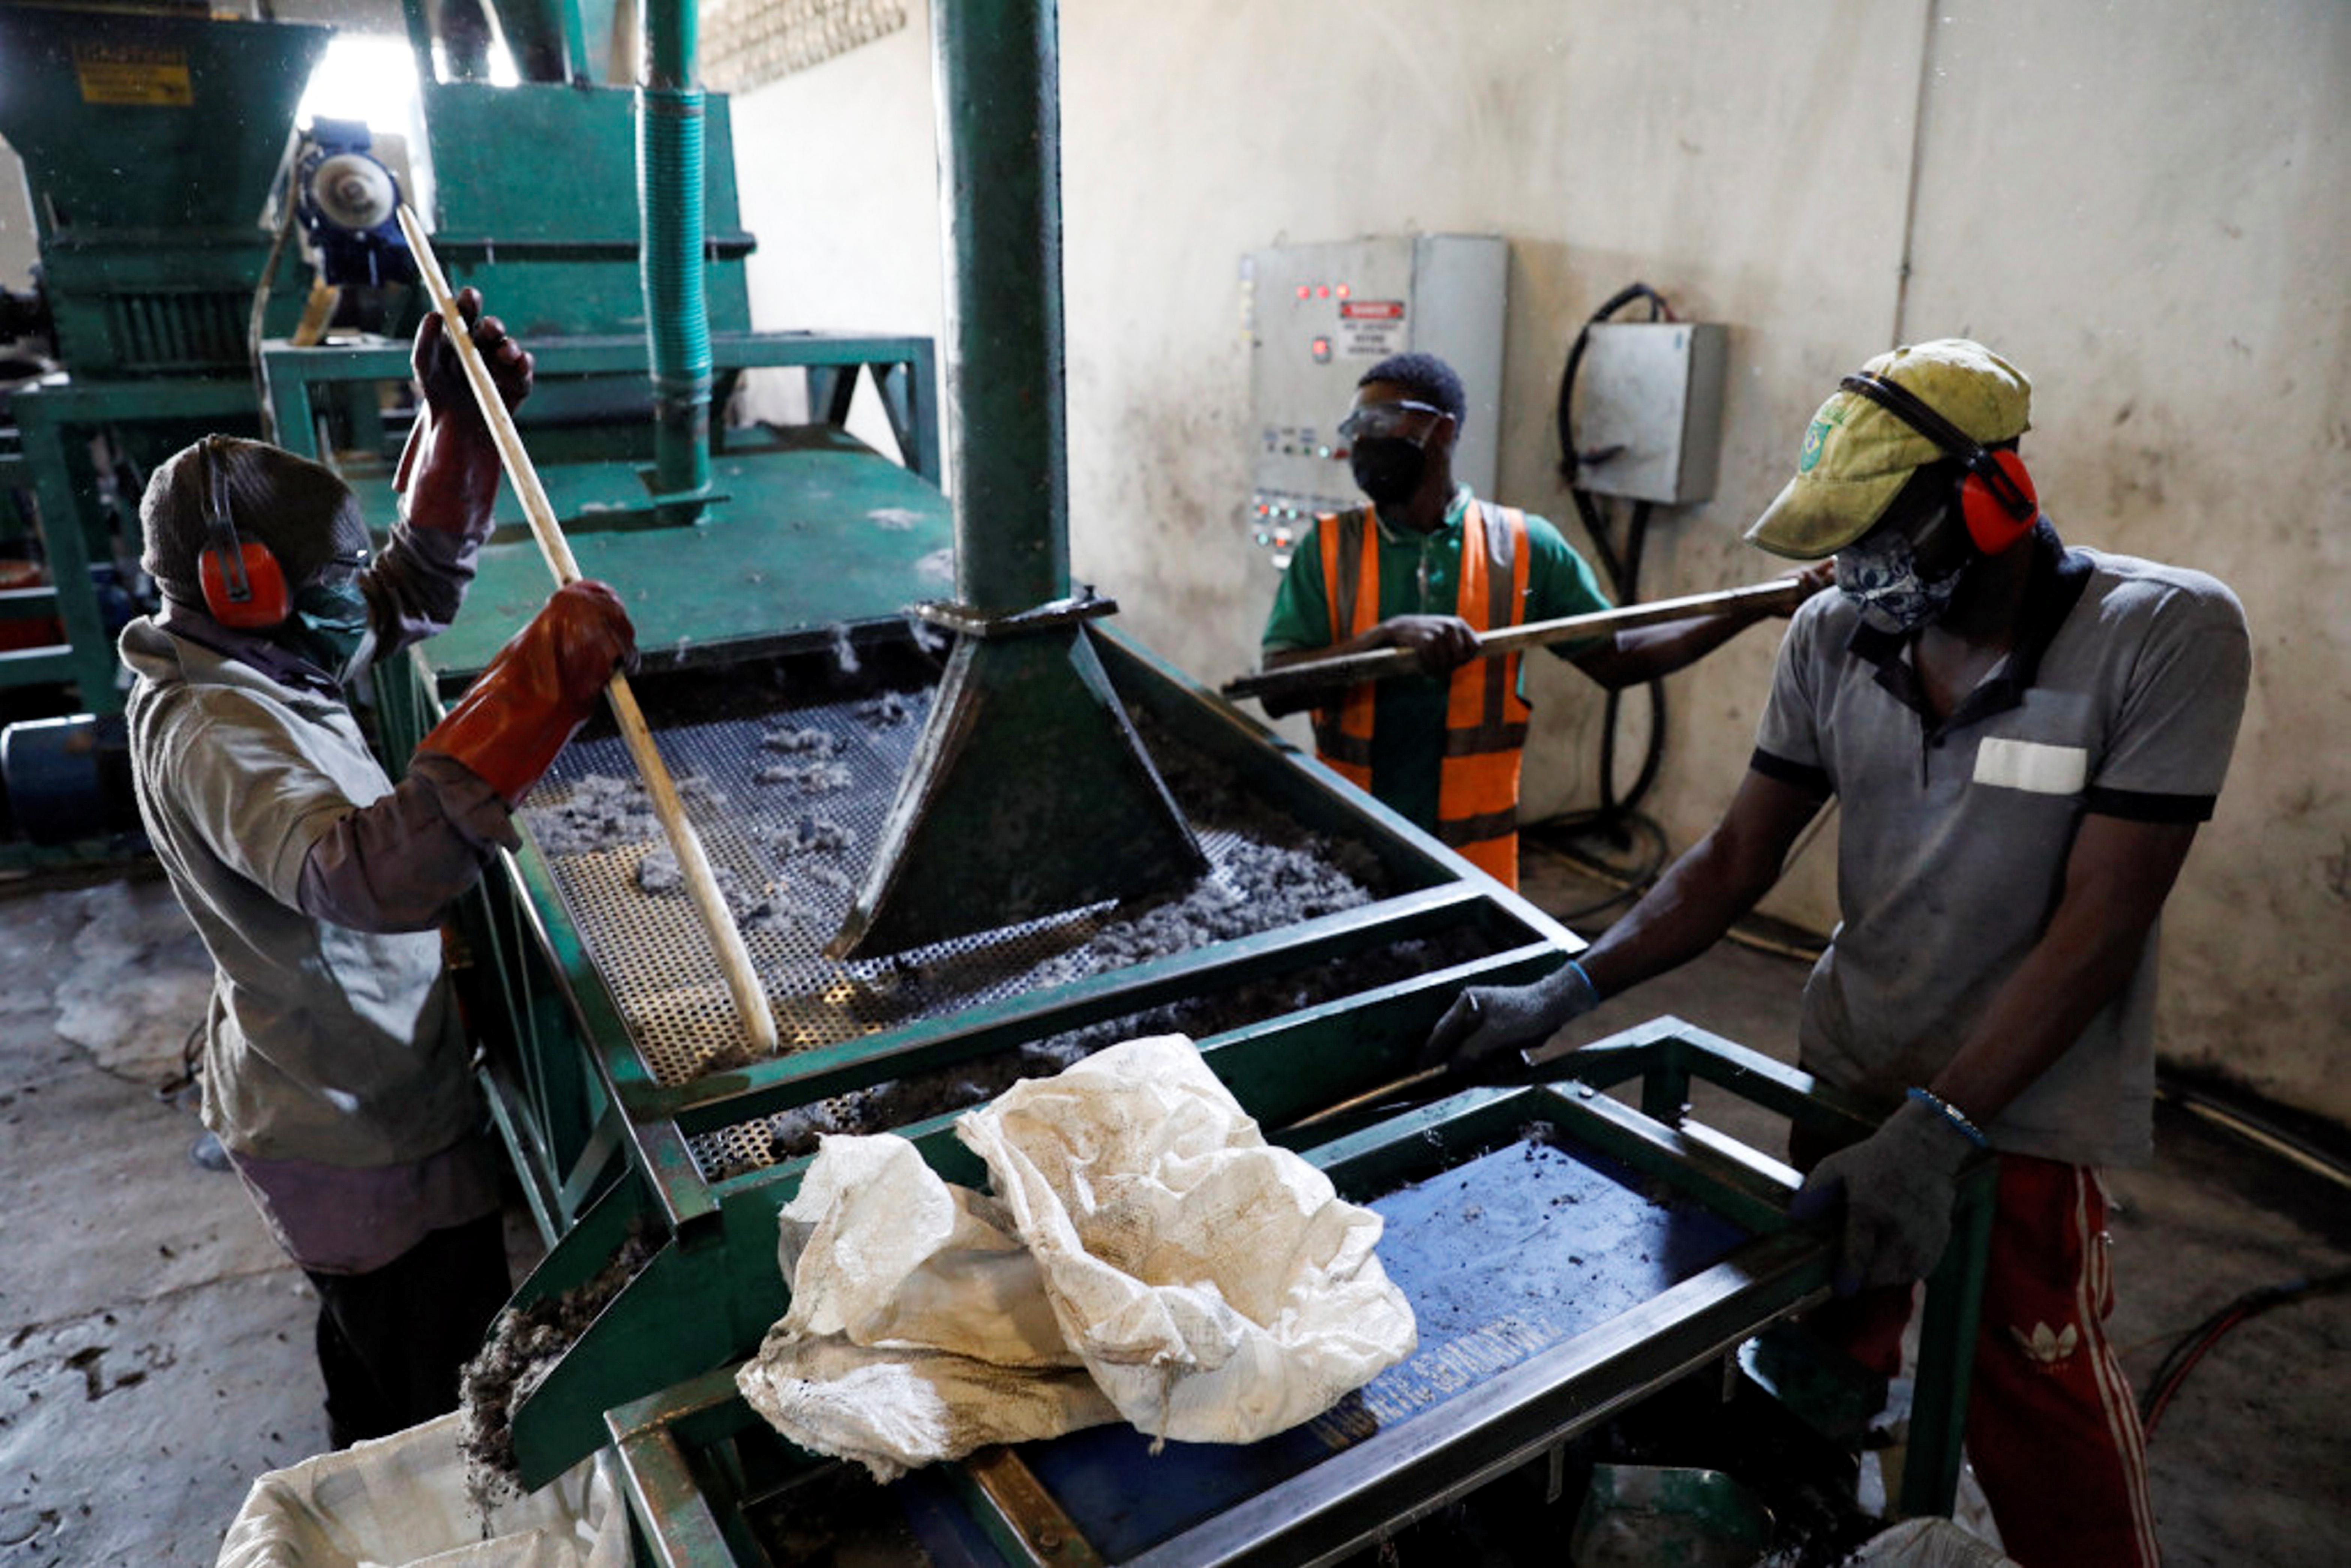 Men work on the recycling line of used car tyres in Ibadan